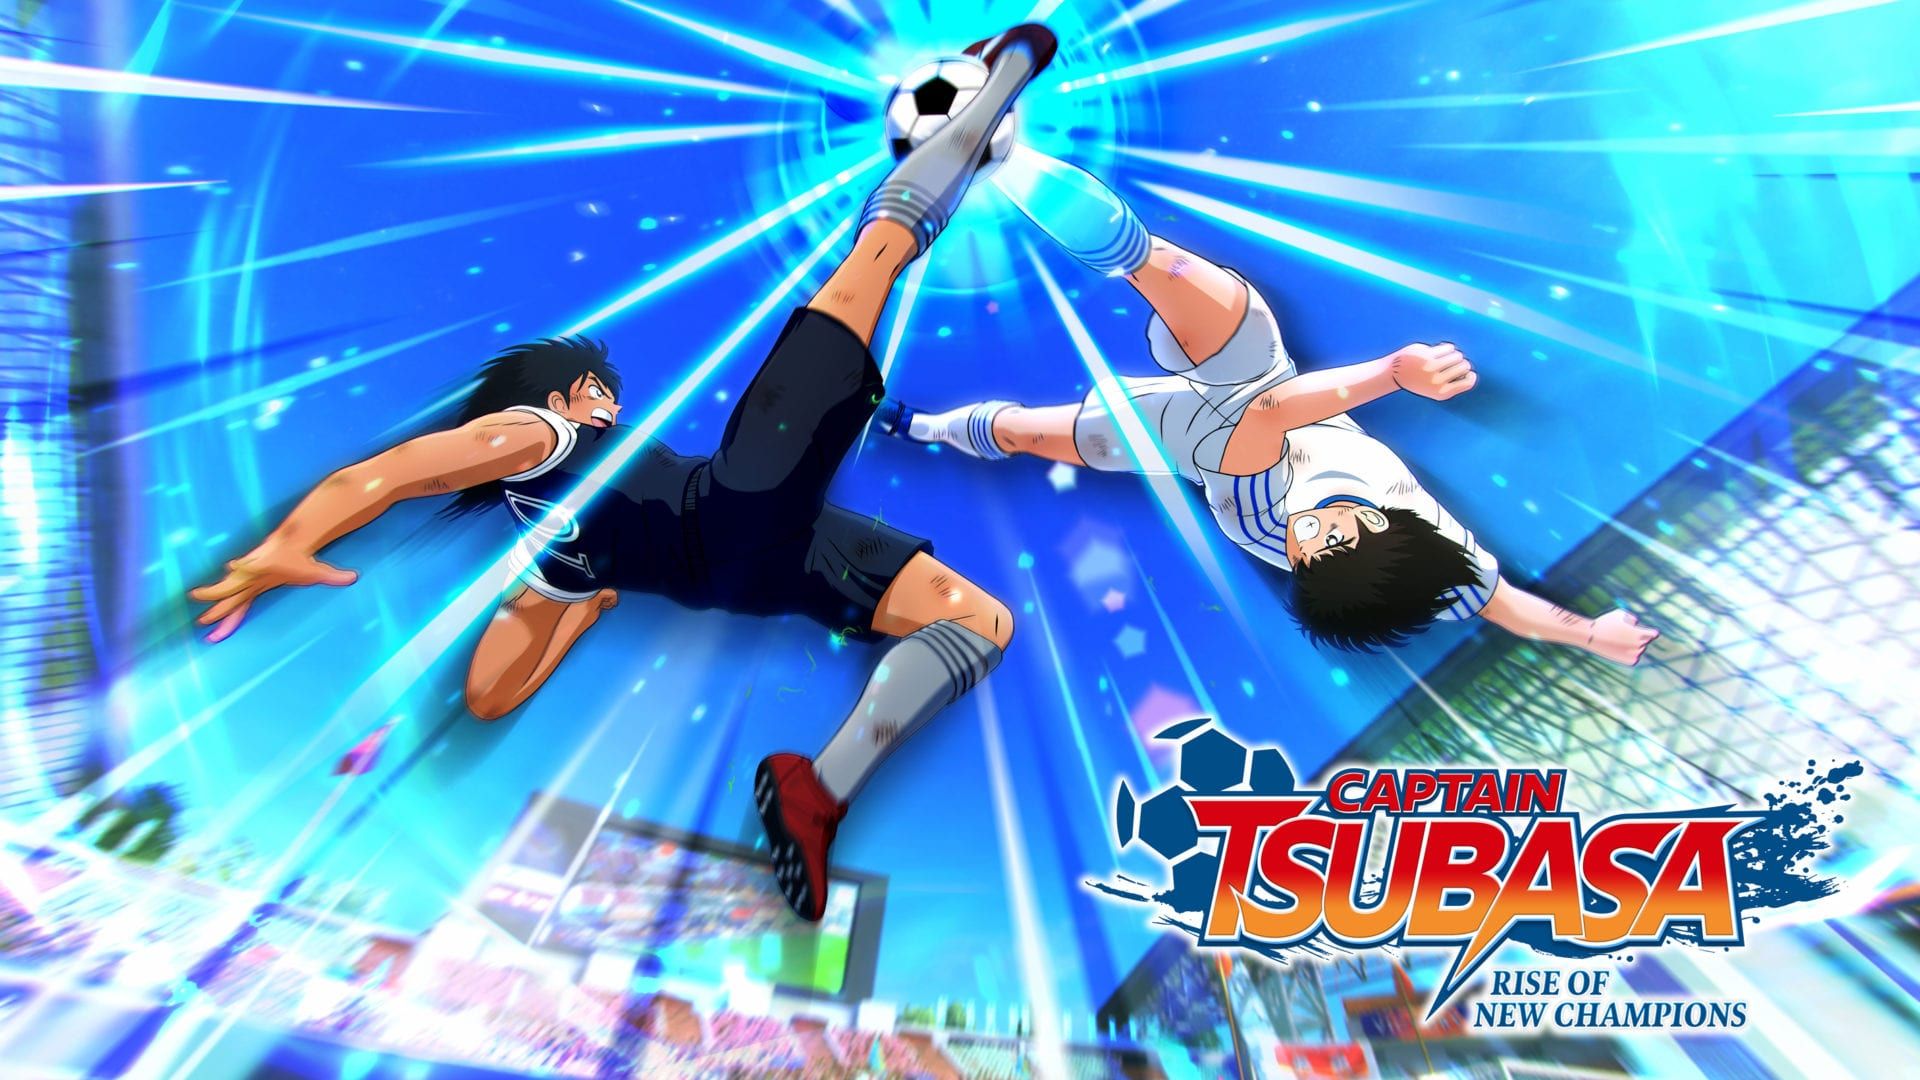 Captain Tsubasa: Rise of New Champions Shows Familiar and New